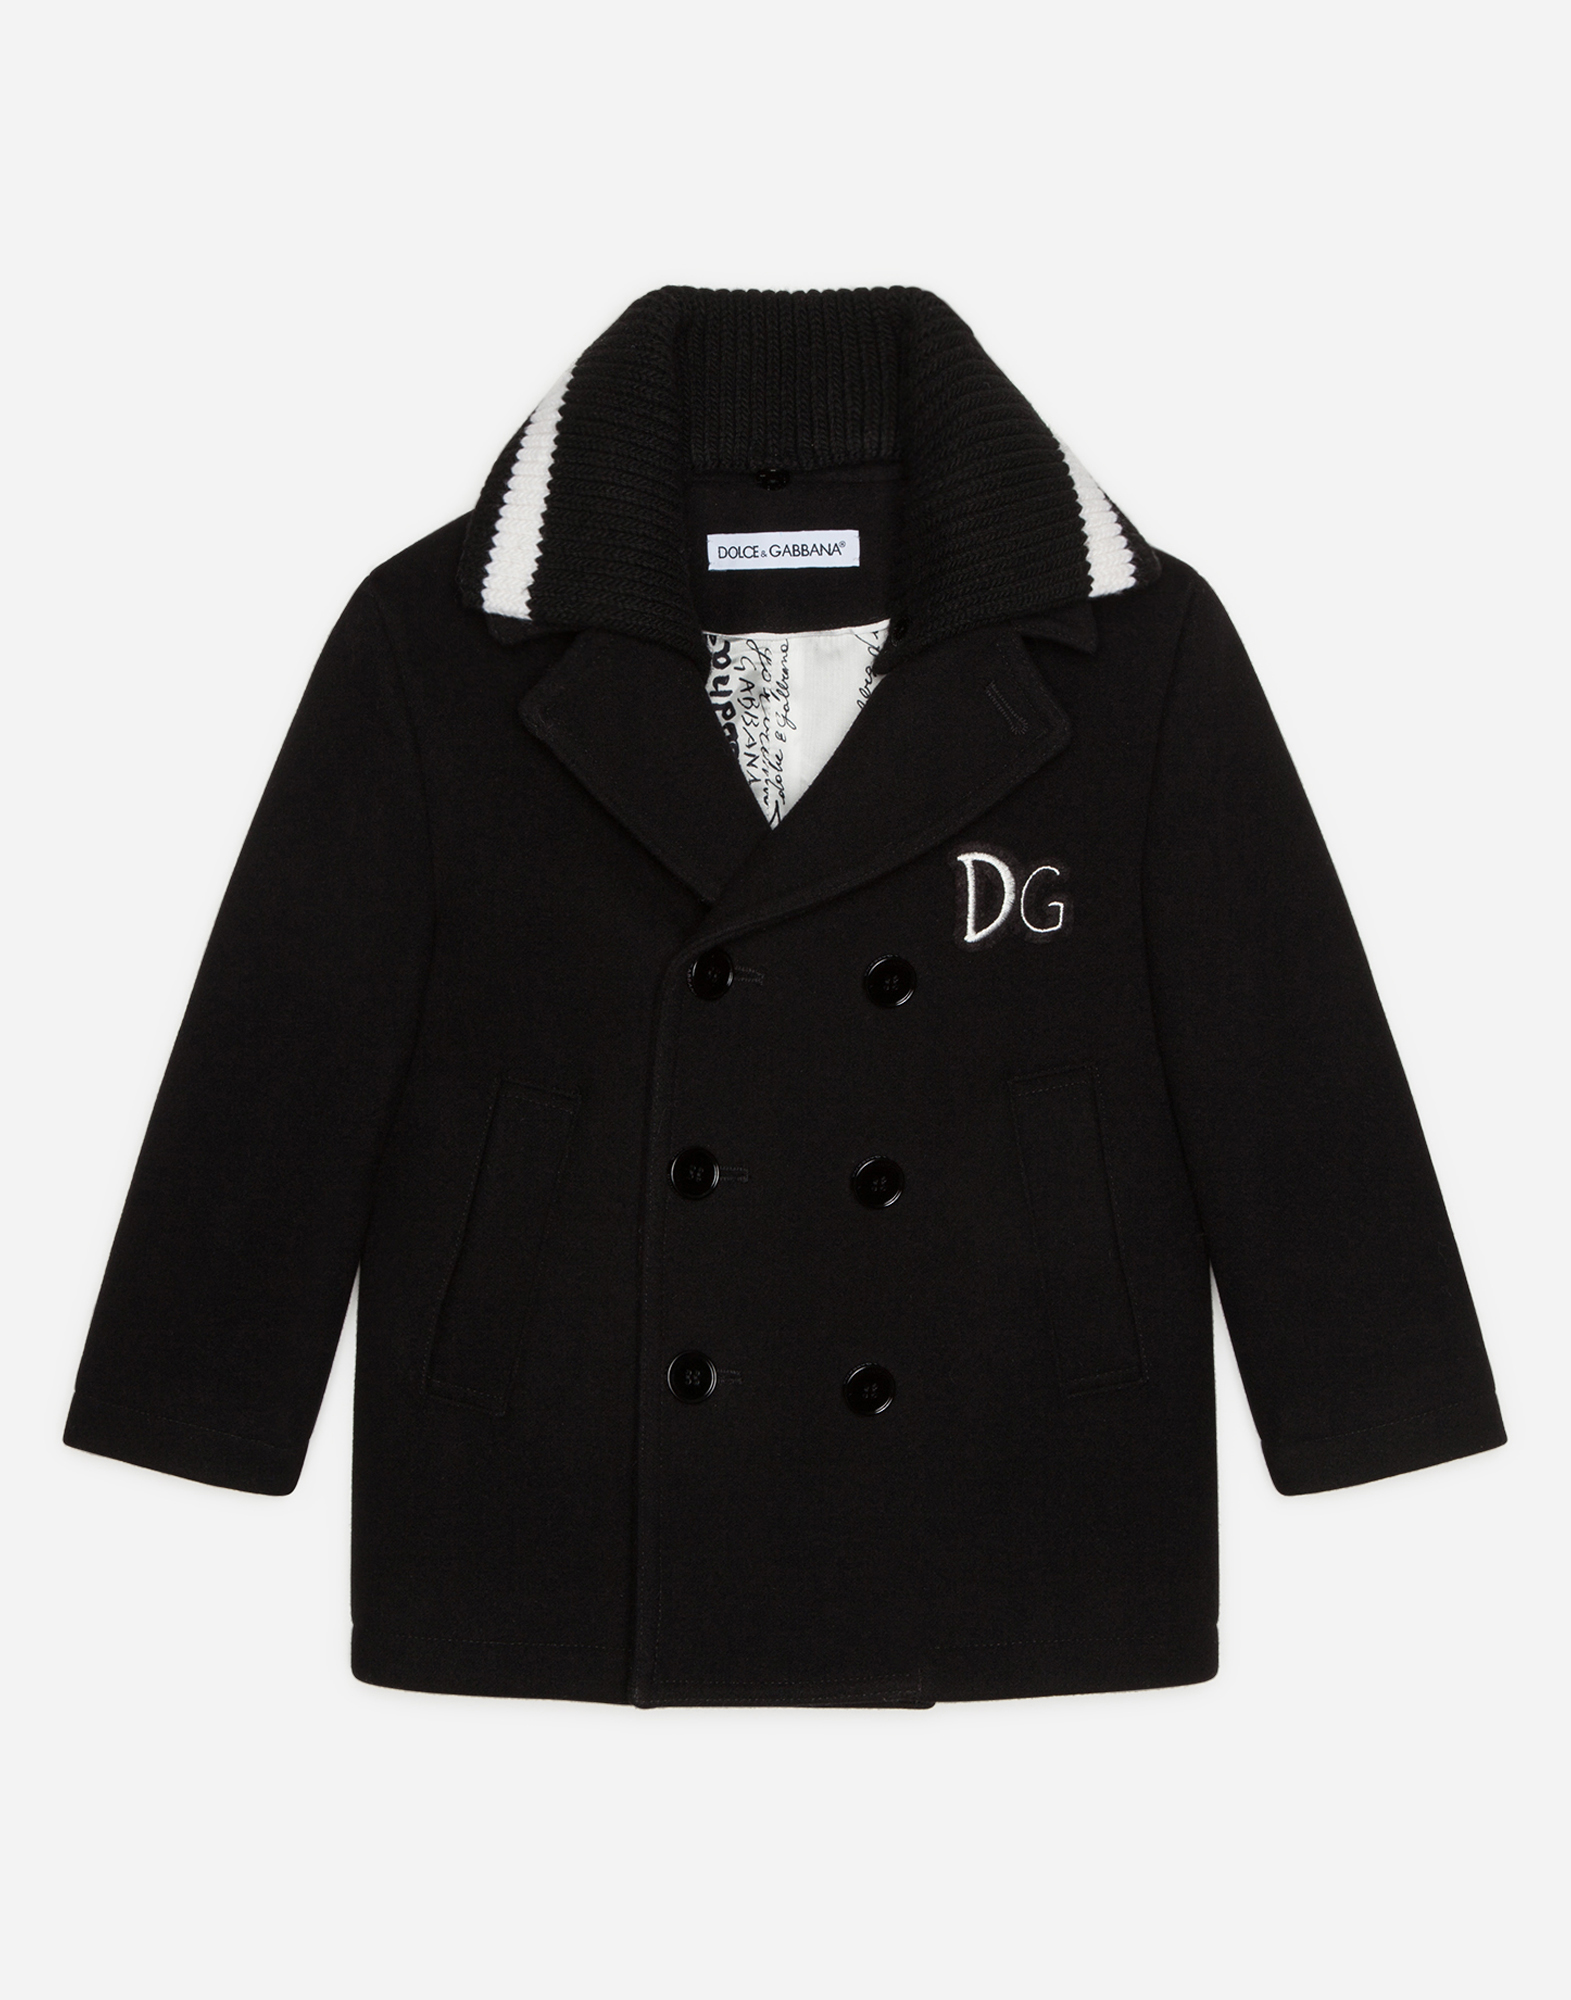 DOLCE & GABBANA BROADCLOTH PEA COAT WITH DG PATCH